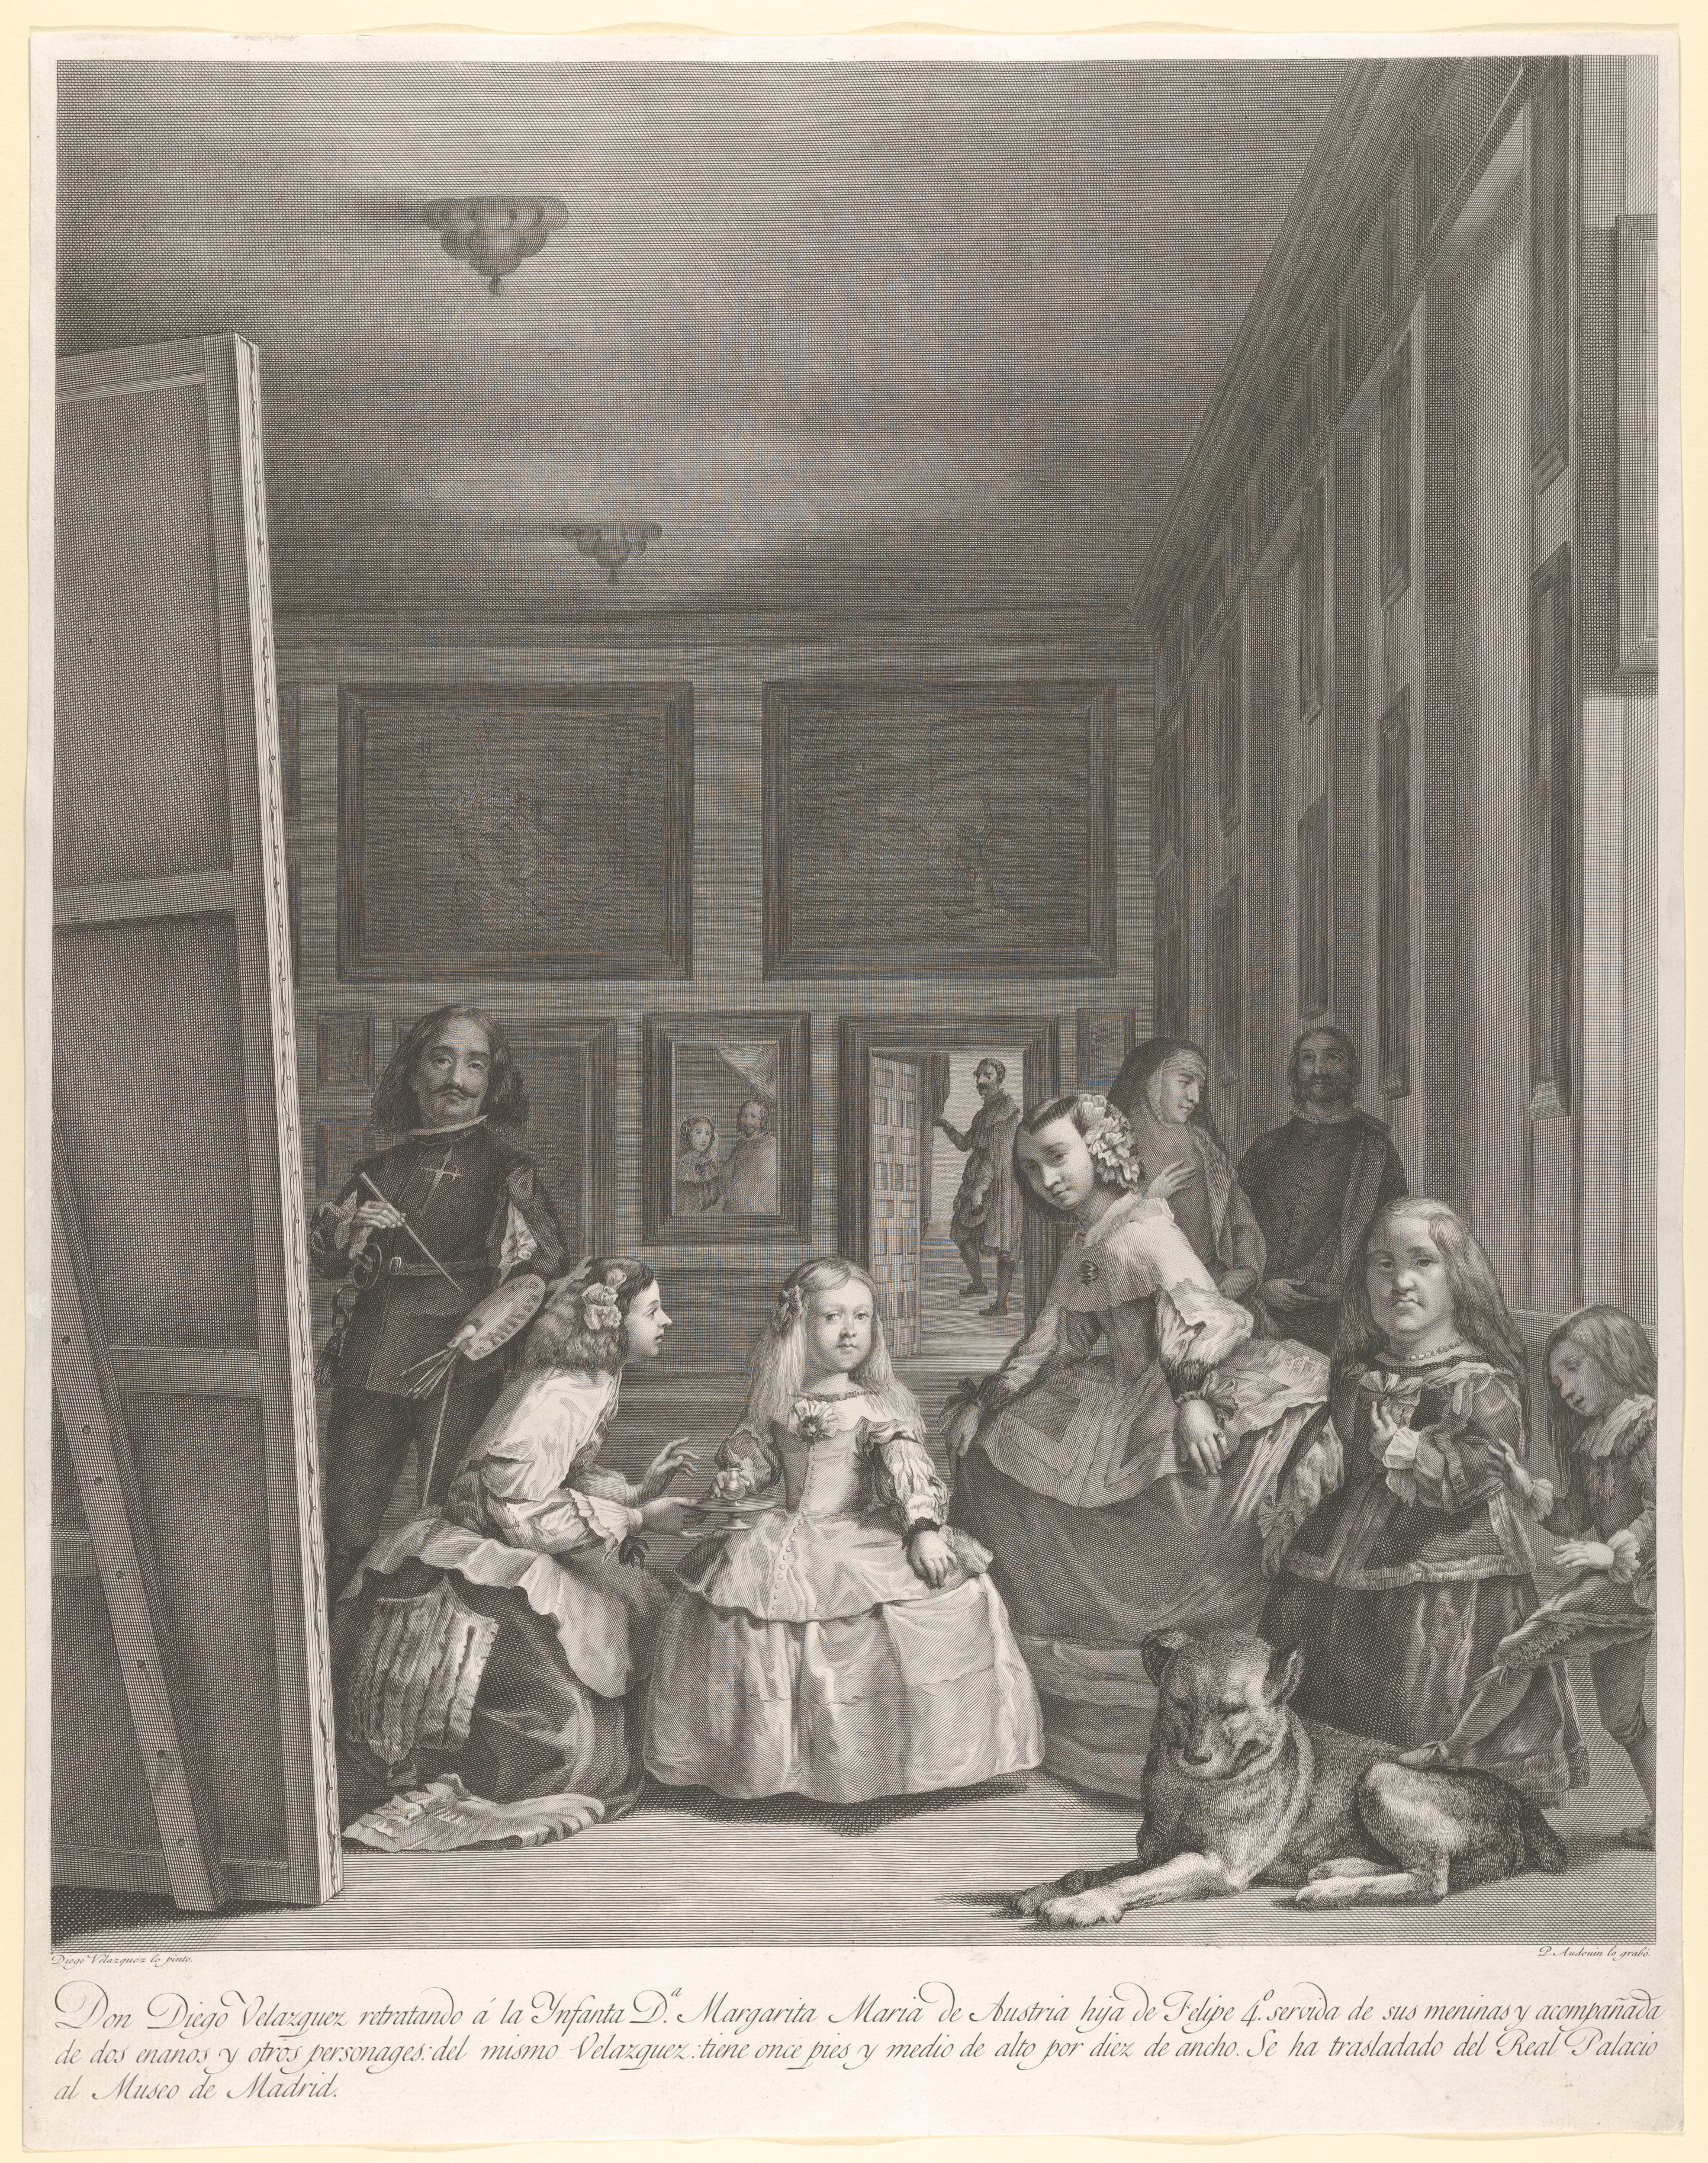 Las Meninas by Diego Velázquez - Facts & History of the Painting